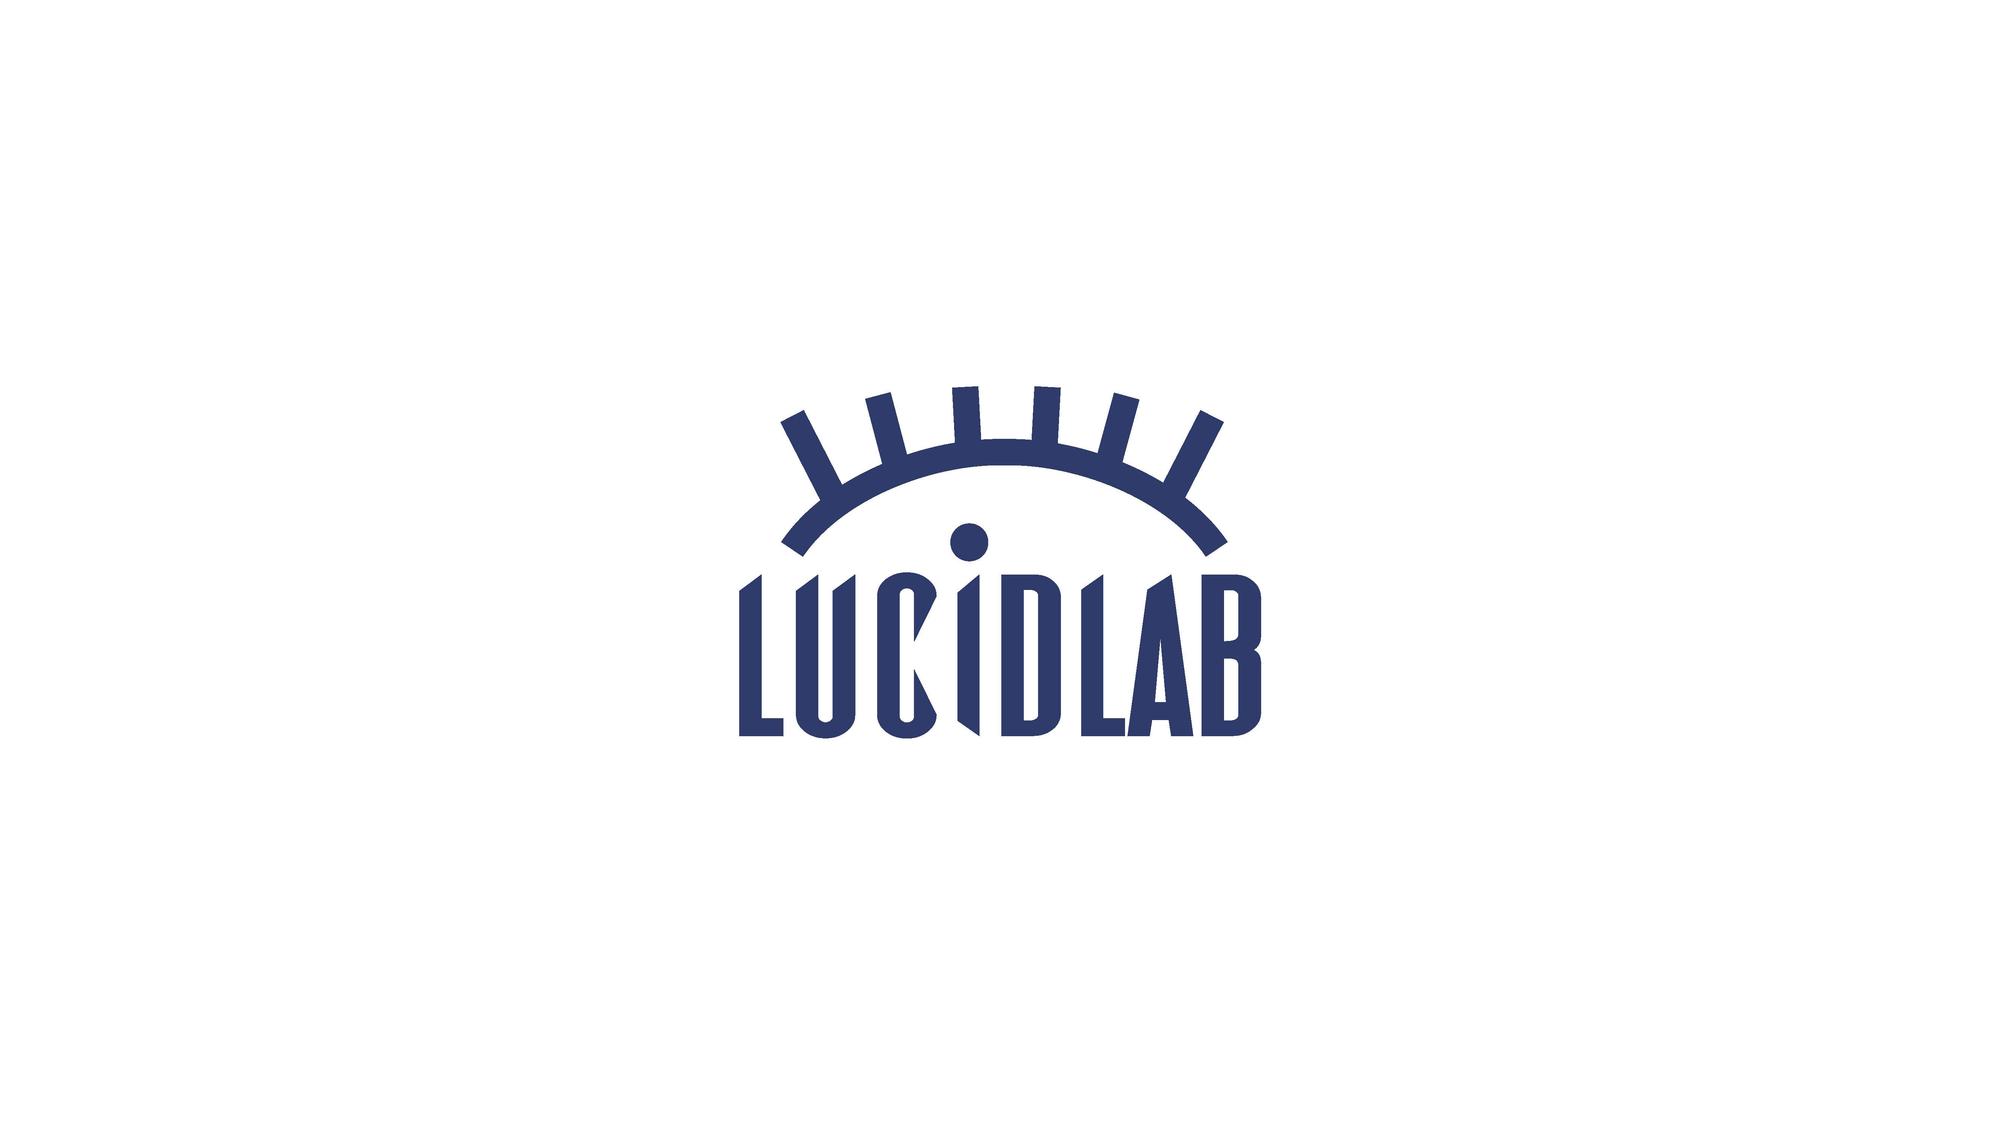 Lucid Lab (Drug about Stay Awake for 72 Hours)